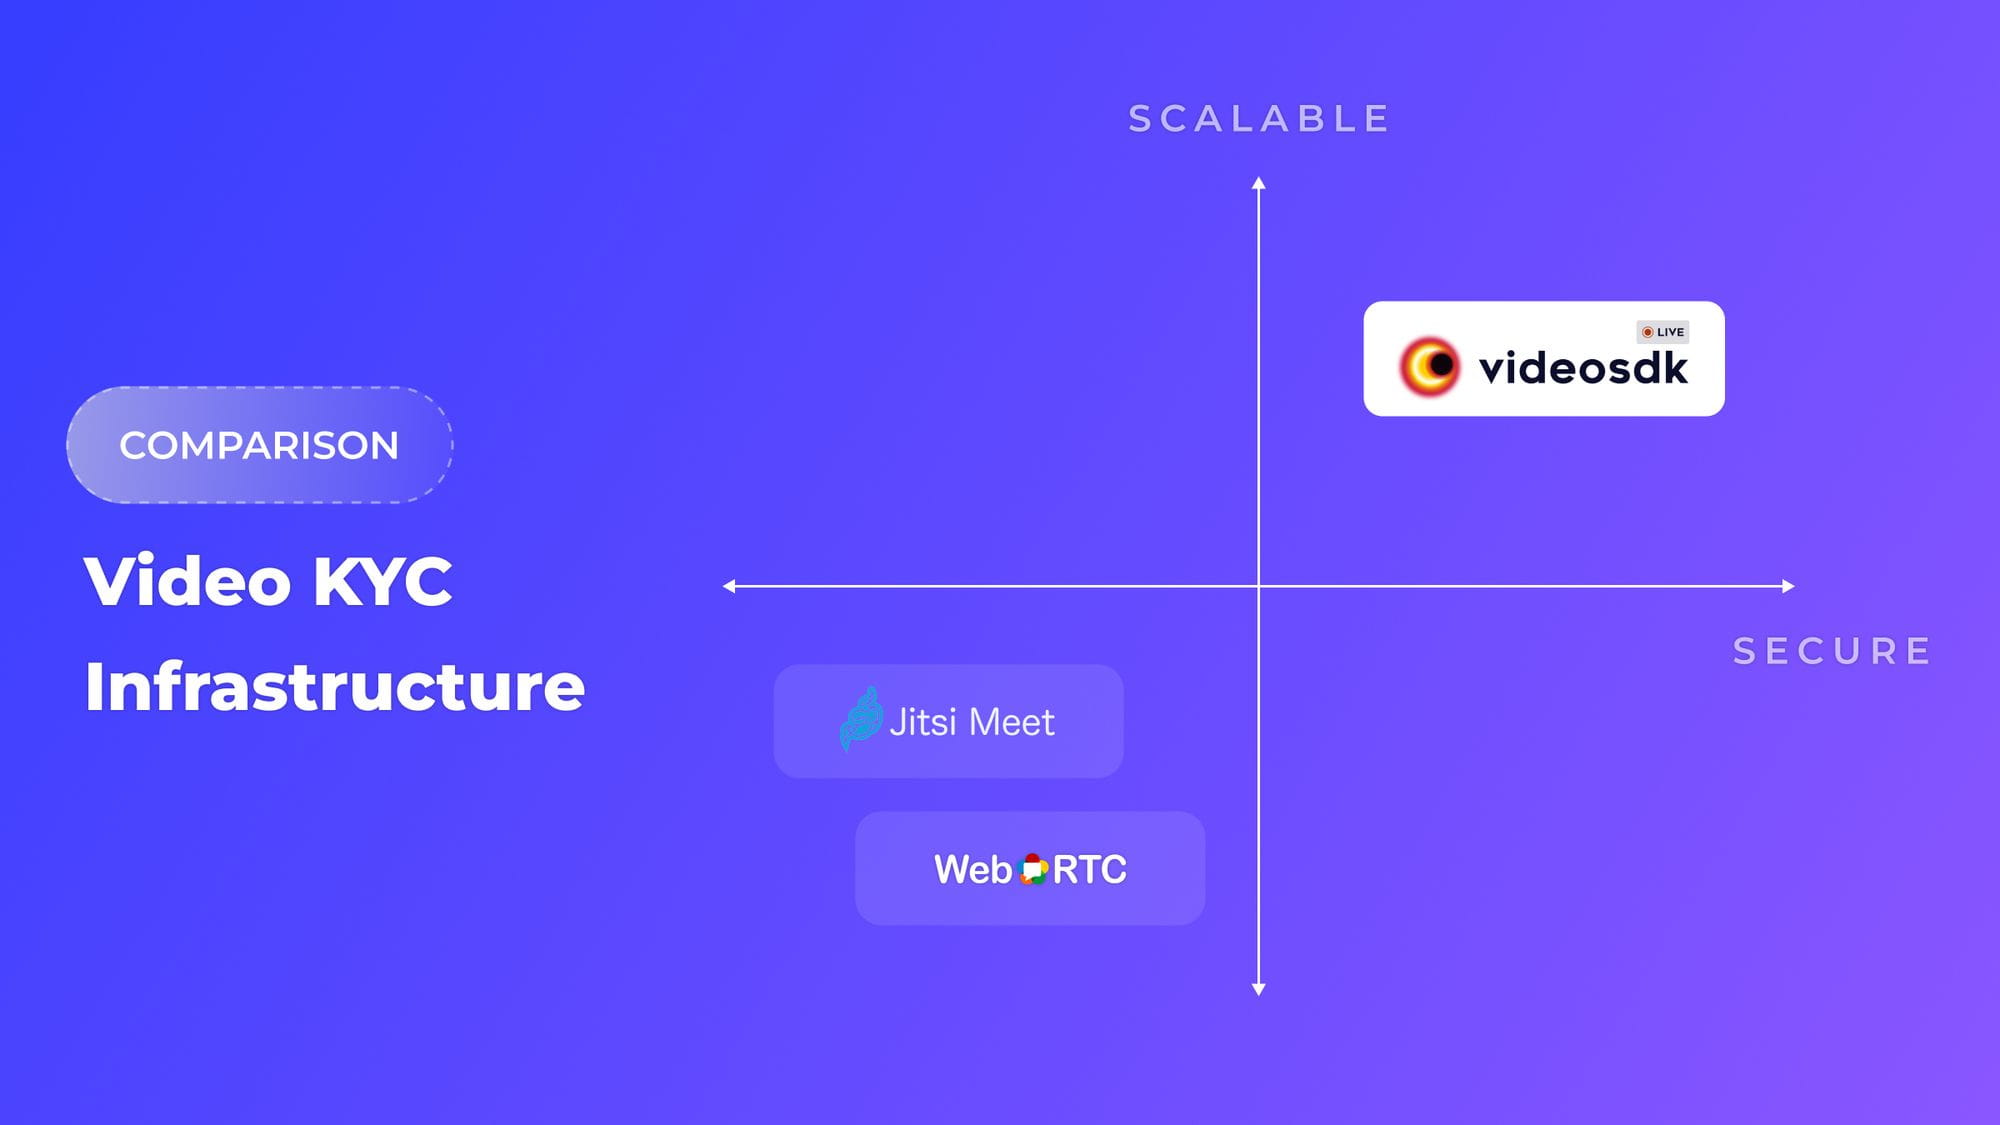 Open Source vs. Video SDK: Which Is Best For Your Video KYC Needs?